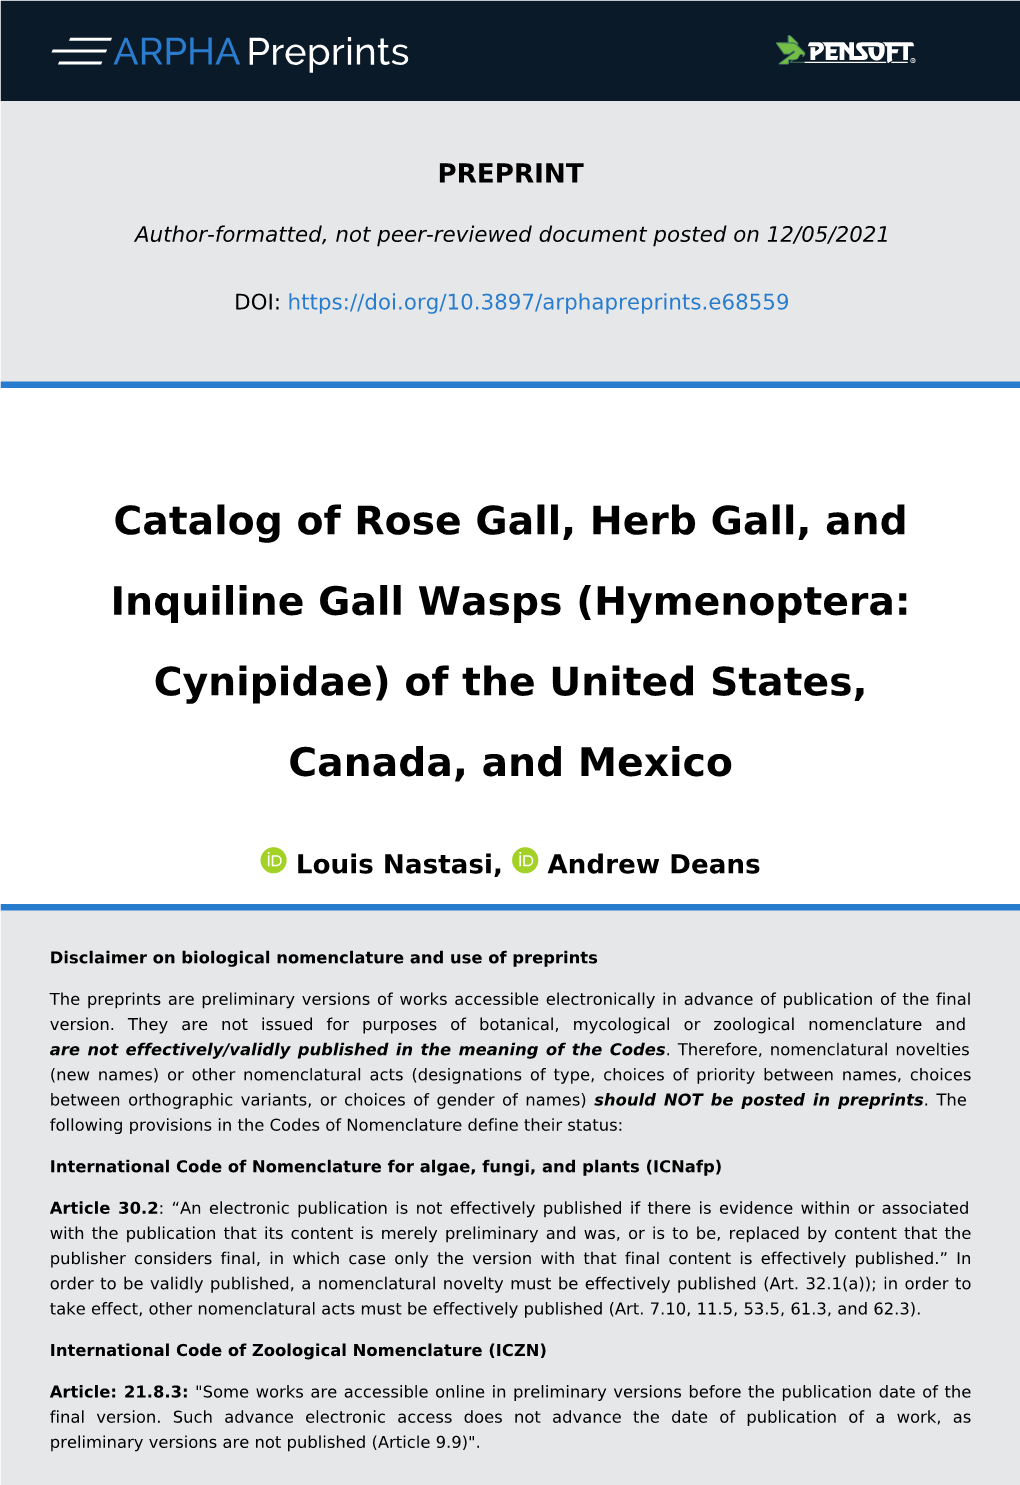 Catalog of Rose Gall, Herb Gall, and Inquiline Gall Wasps (Hymenoptera: Cynipidae) of the United States, Canada, and Mexico